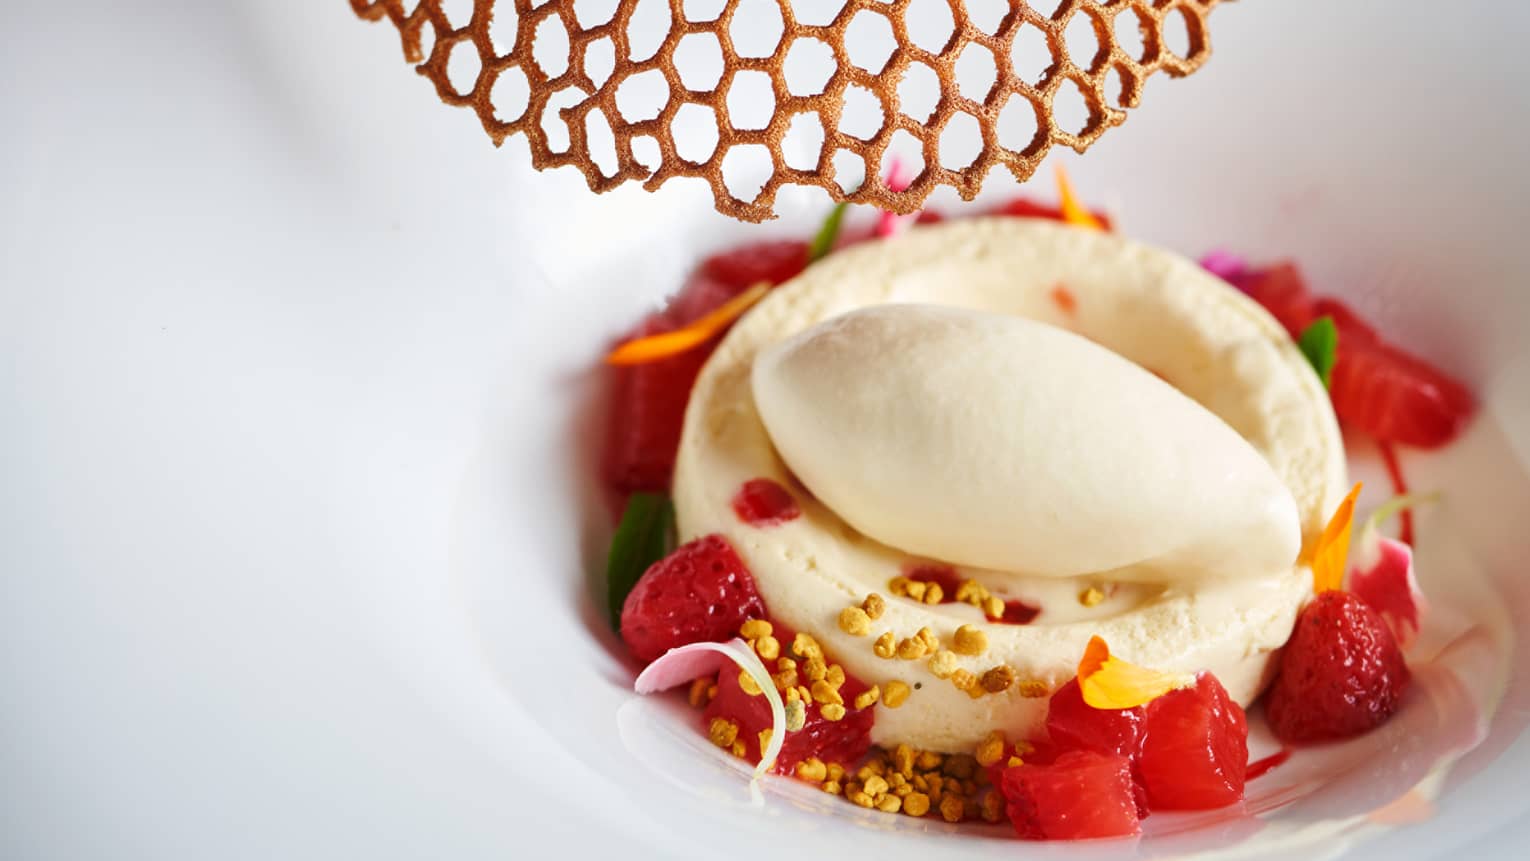 Honey parfait, strawberries and goat milk ice cream in a bowl.